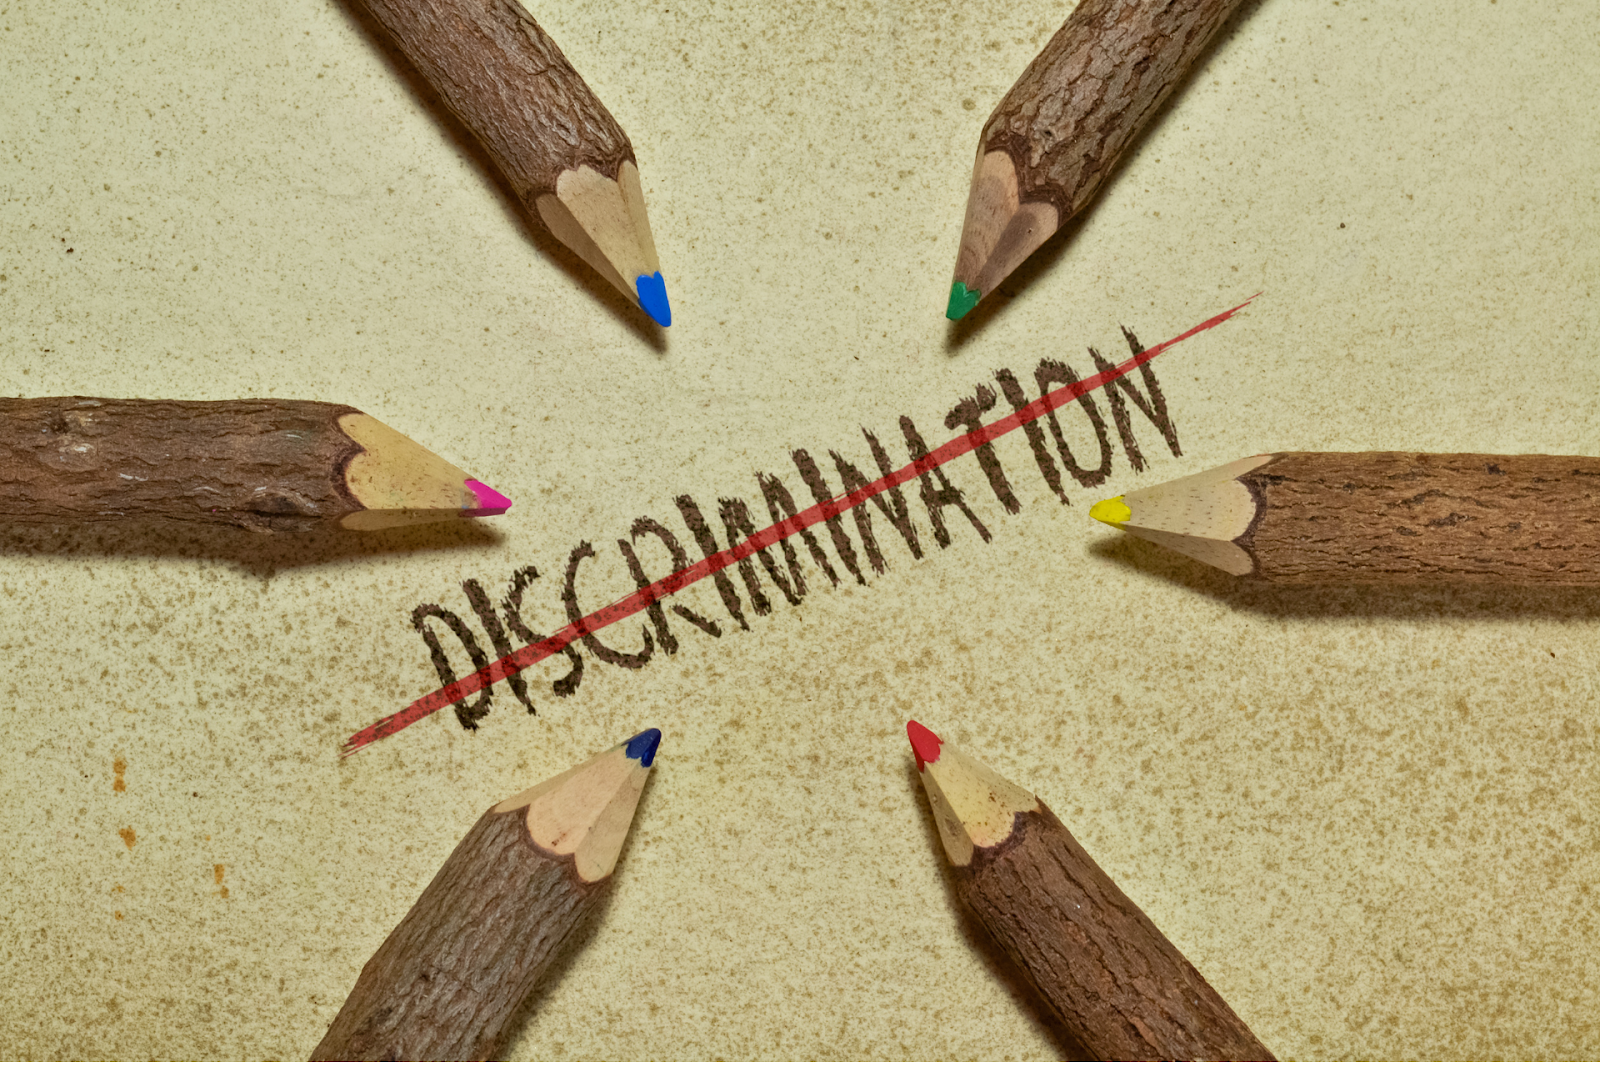 The word “discrimination” struck out by a red line
